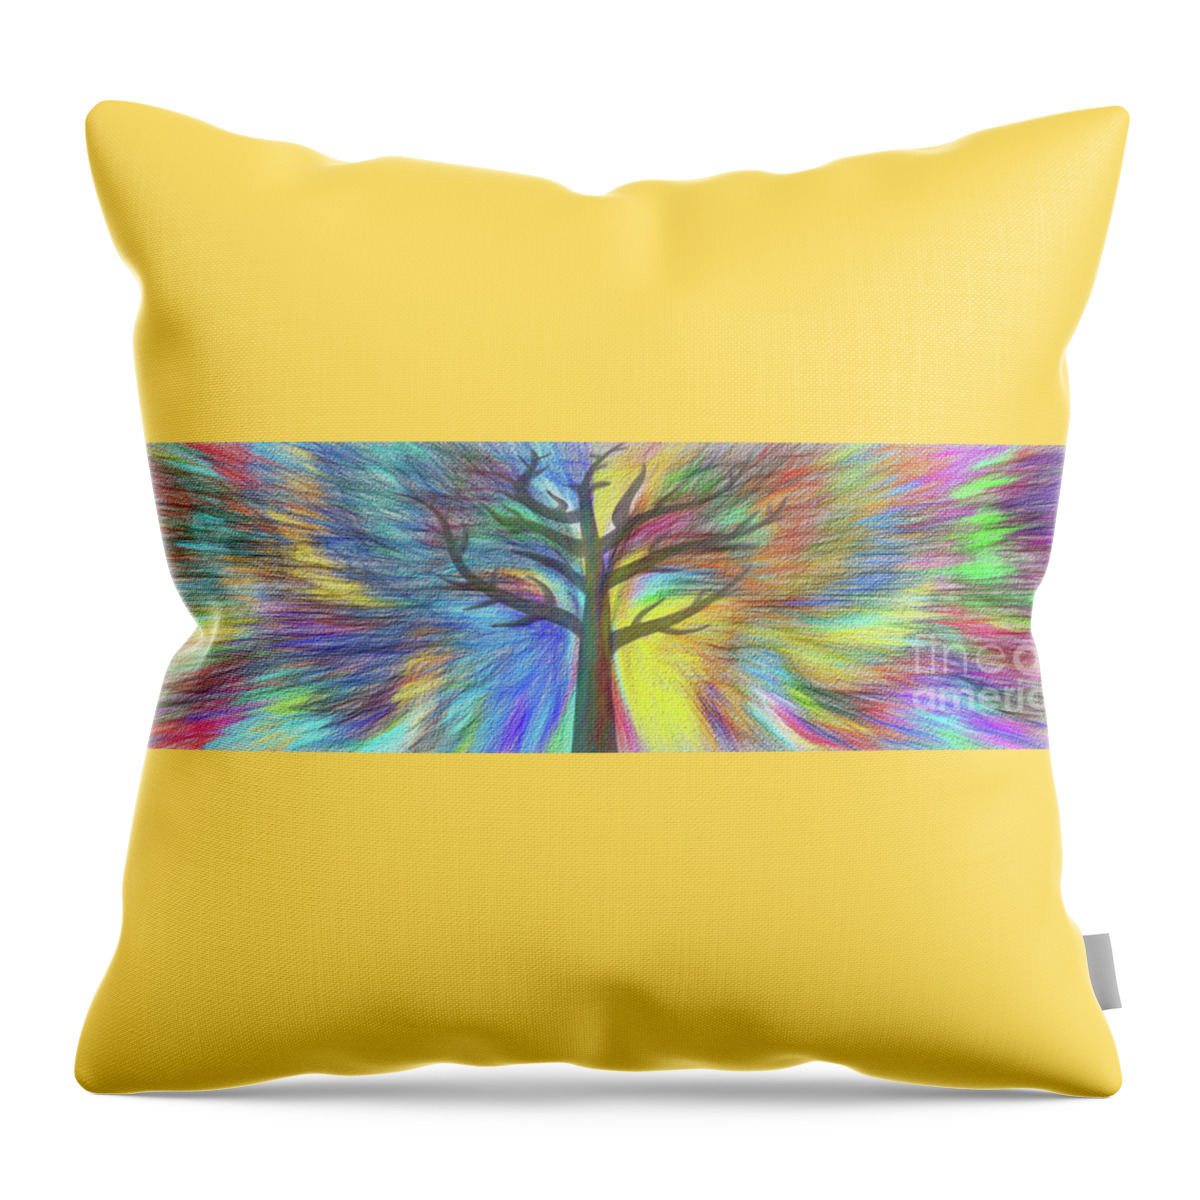 Rainbow Tree Throw Pillow featuring the digital art Rainbow Tree by Kaye Menner by Kaye Menner